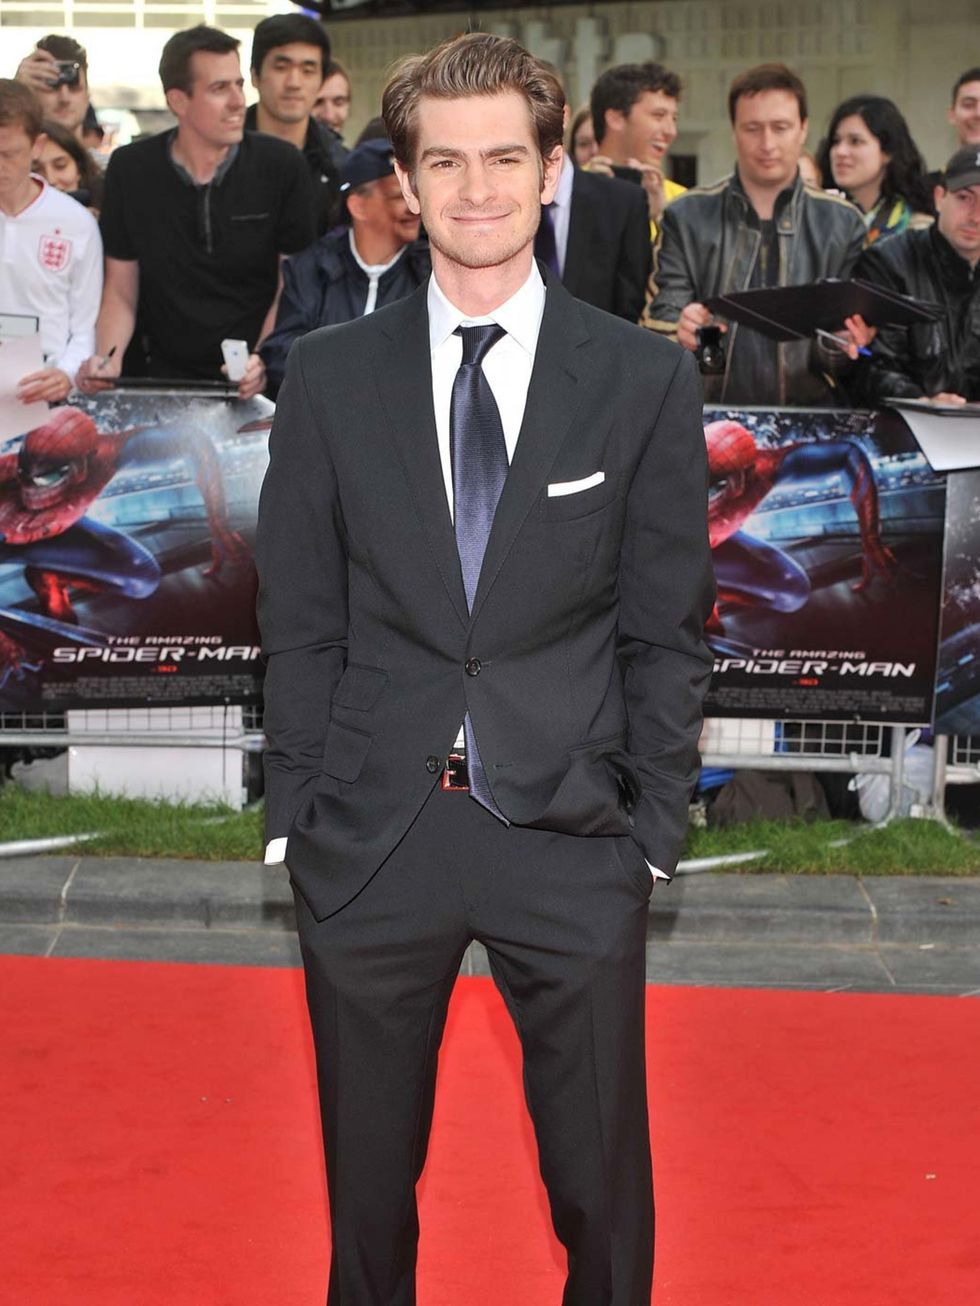 <p>Andrew Garfield in Tom Ford at the Amazing Spiderman Premiere in London. He plays Peter Parker  the high school student who becomes Spidermand  in the film and says he has been dreaming of playing the role since he was 3.</p>